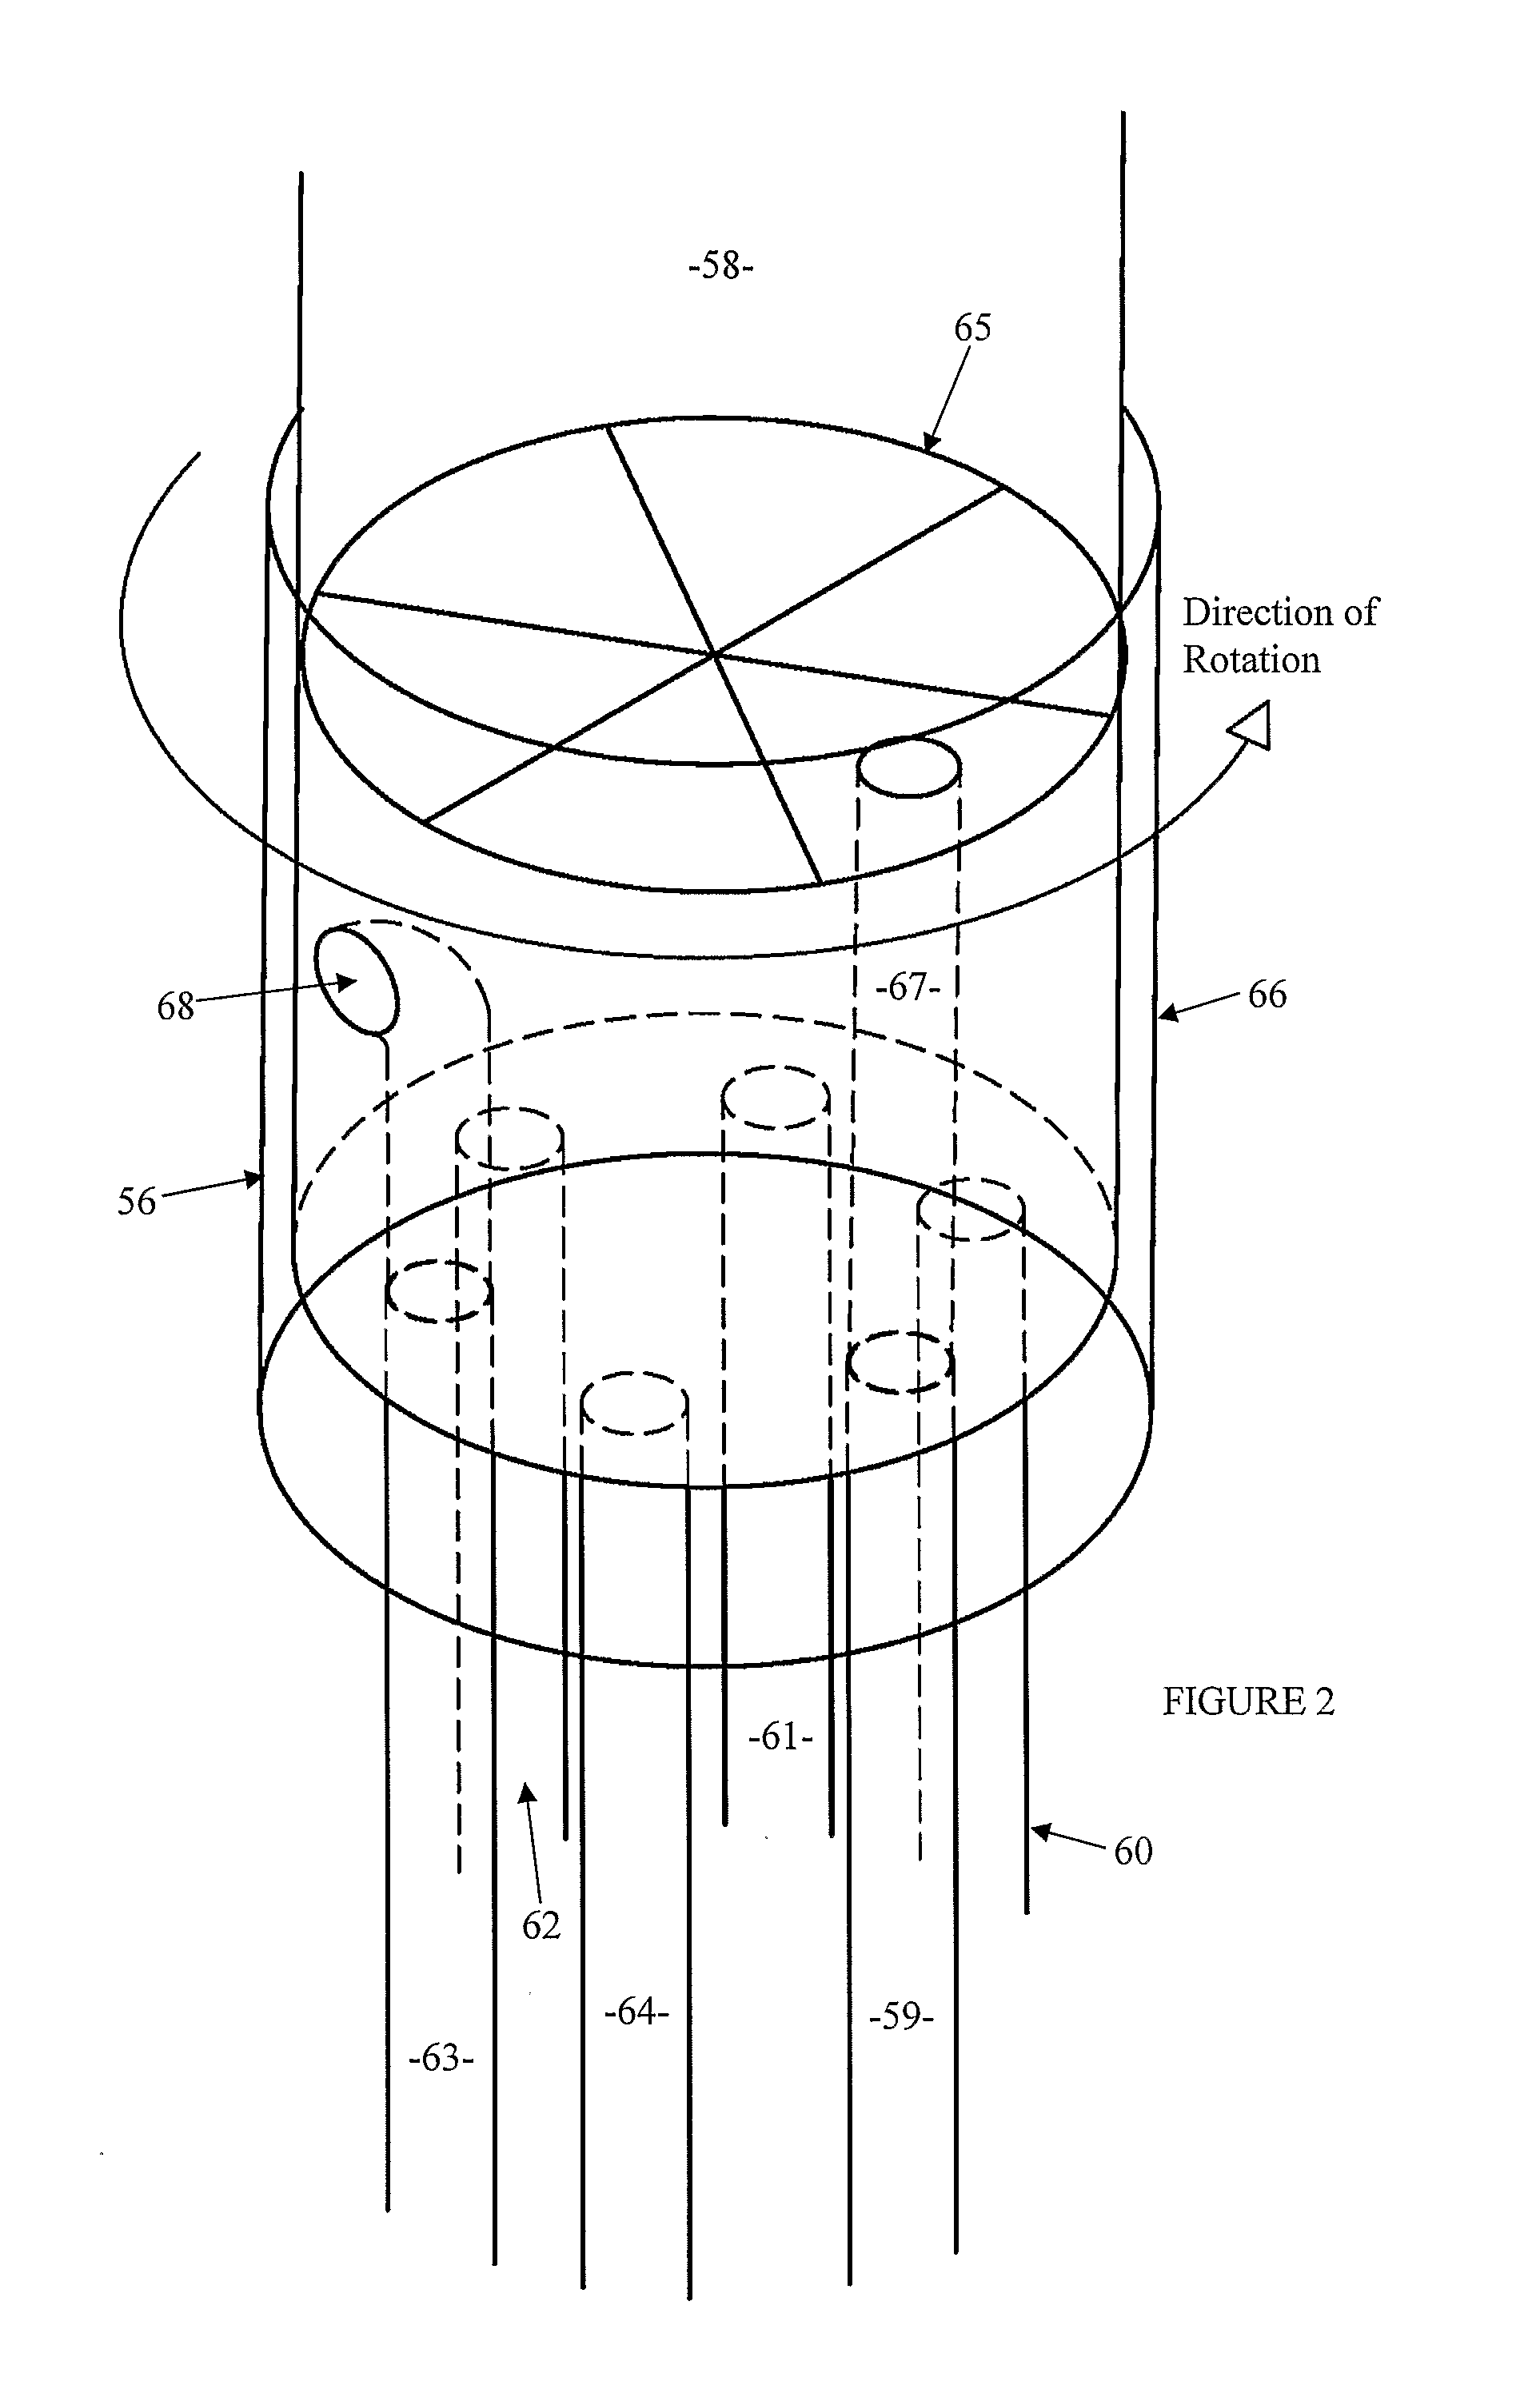 Apparatus for Preventing Deep Vein Thrombosis